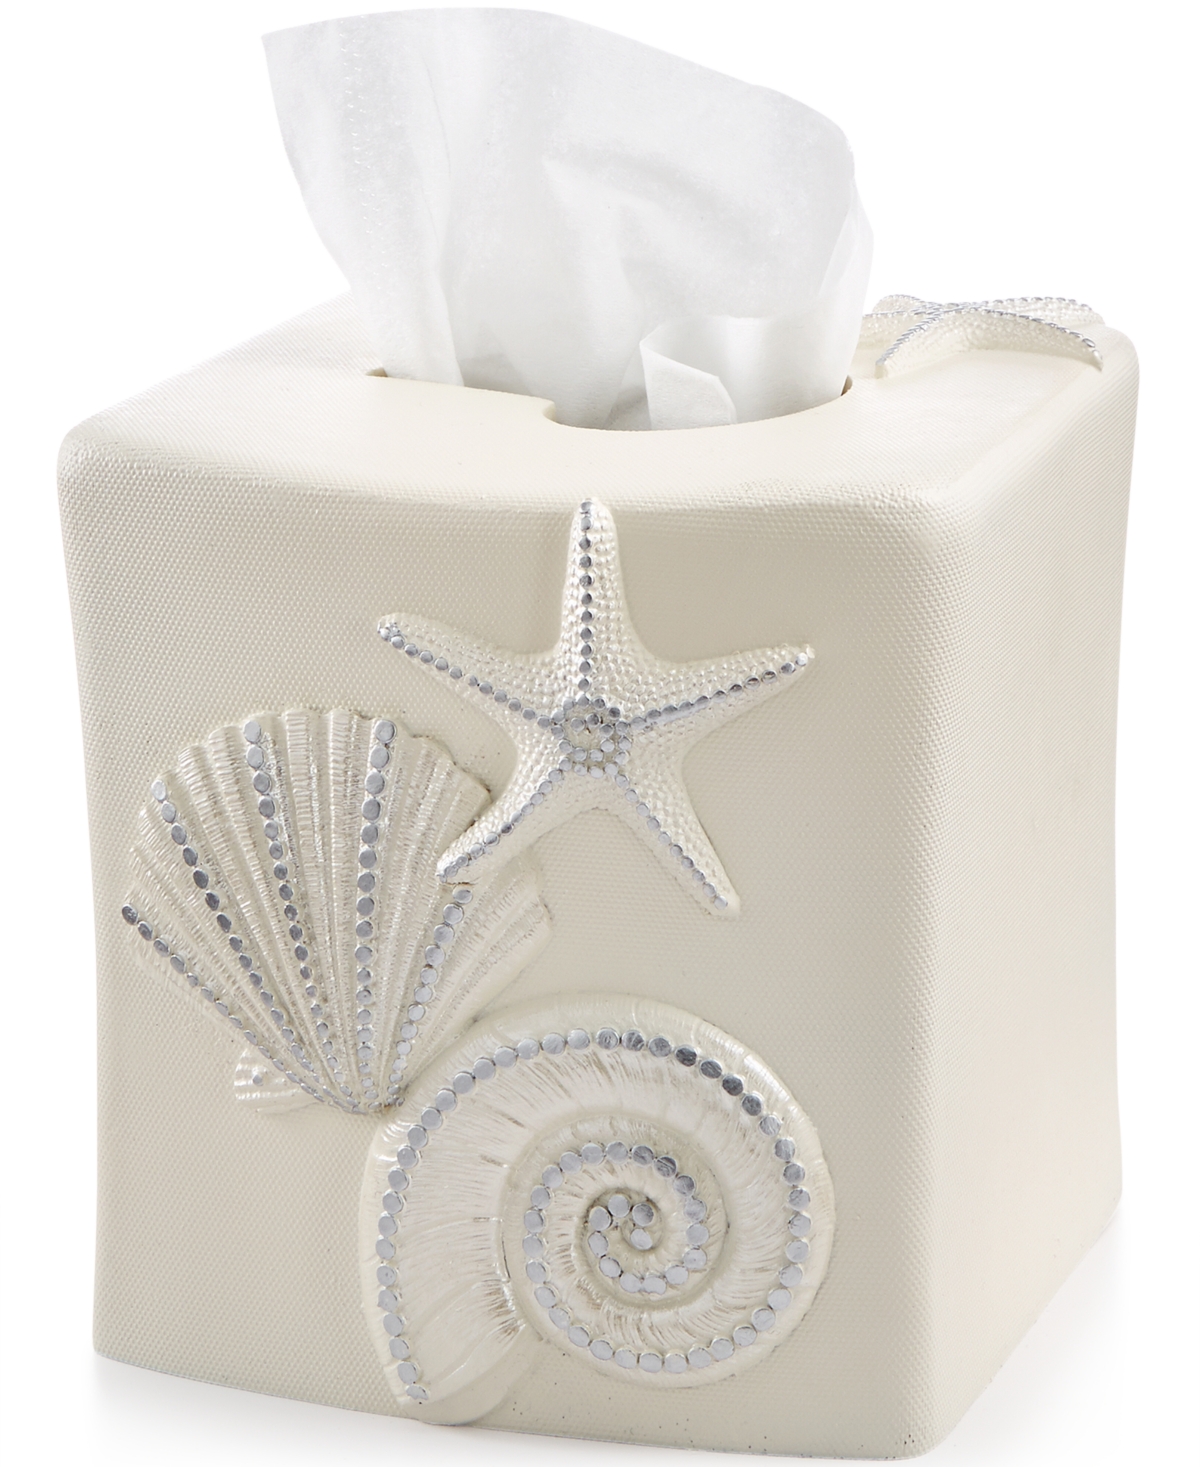 Sequin Shells Beachy Resin Tissue Box Cover - Ivory